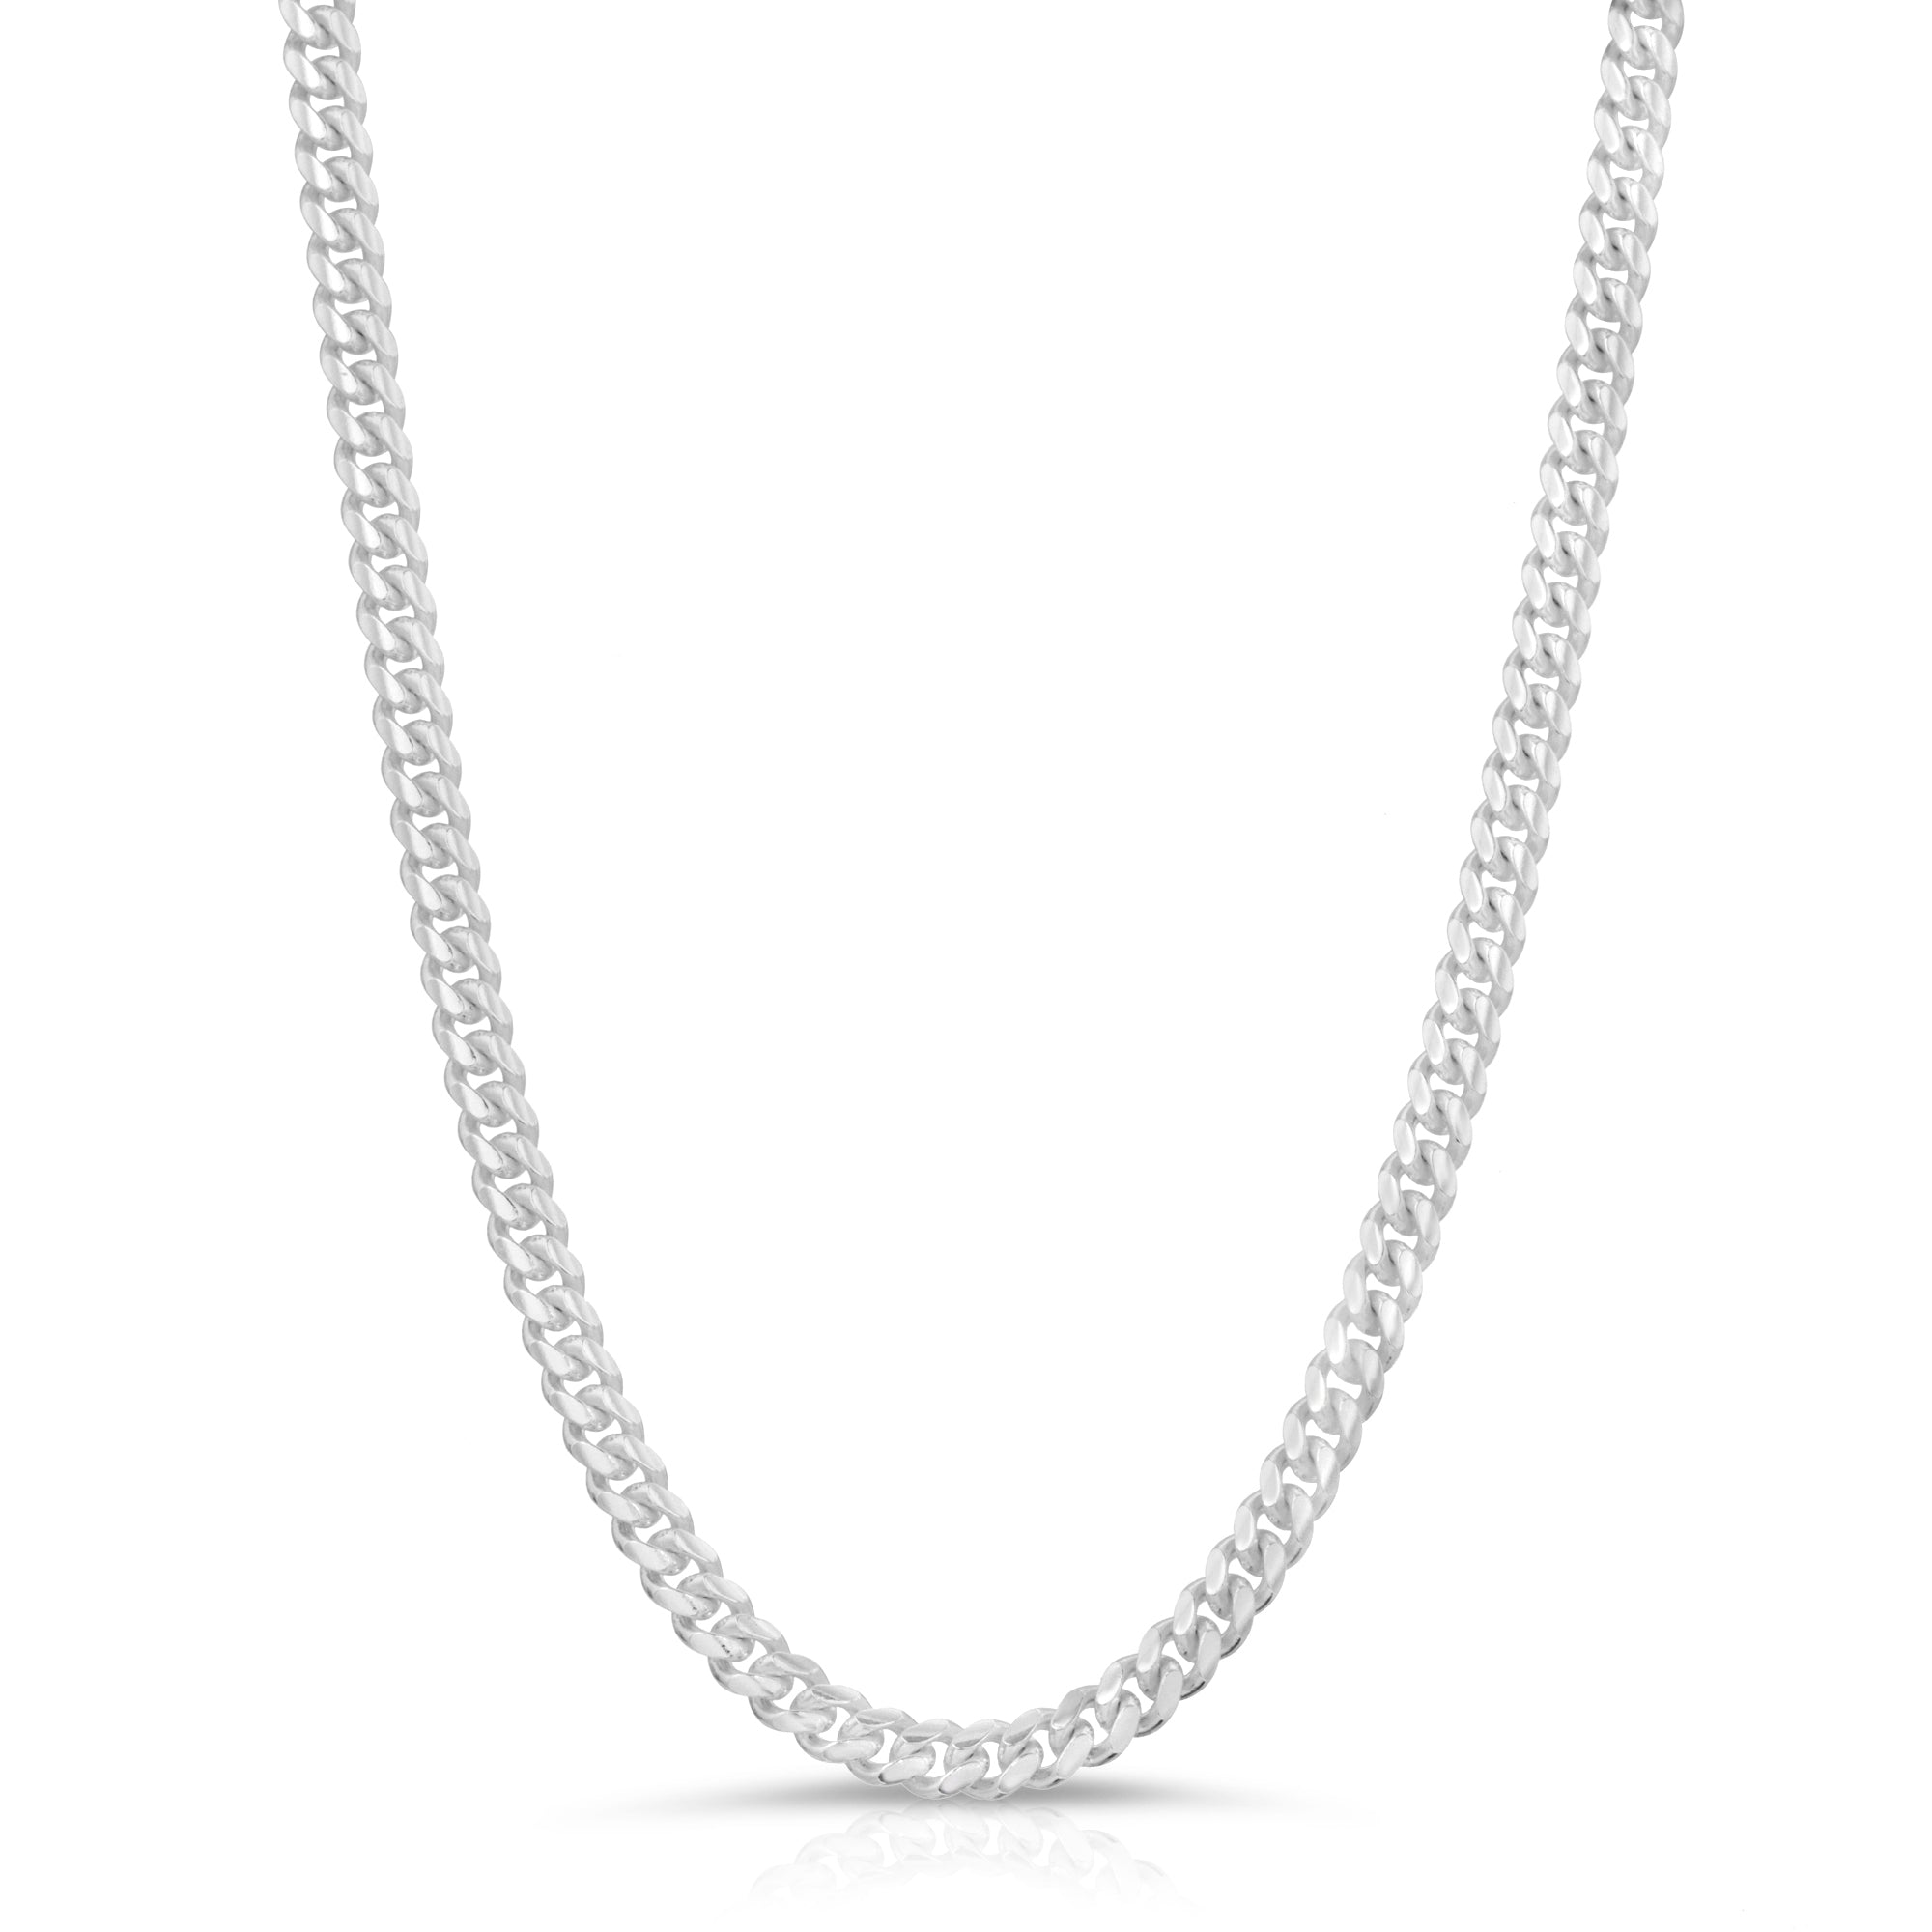 4mm Cuban Chain Sterling Silver - Luke Zion Jewelry 18 Inches